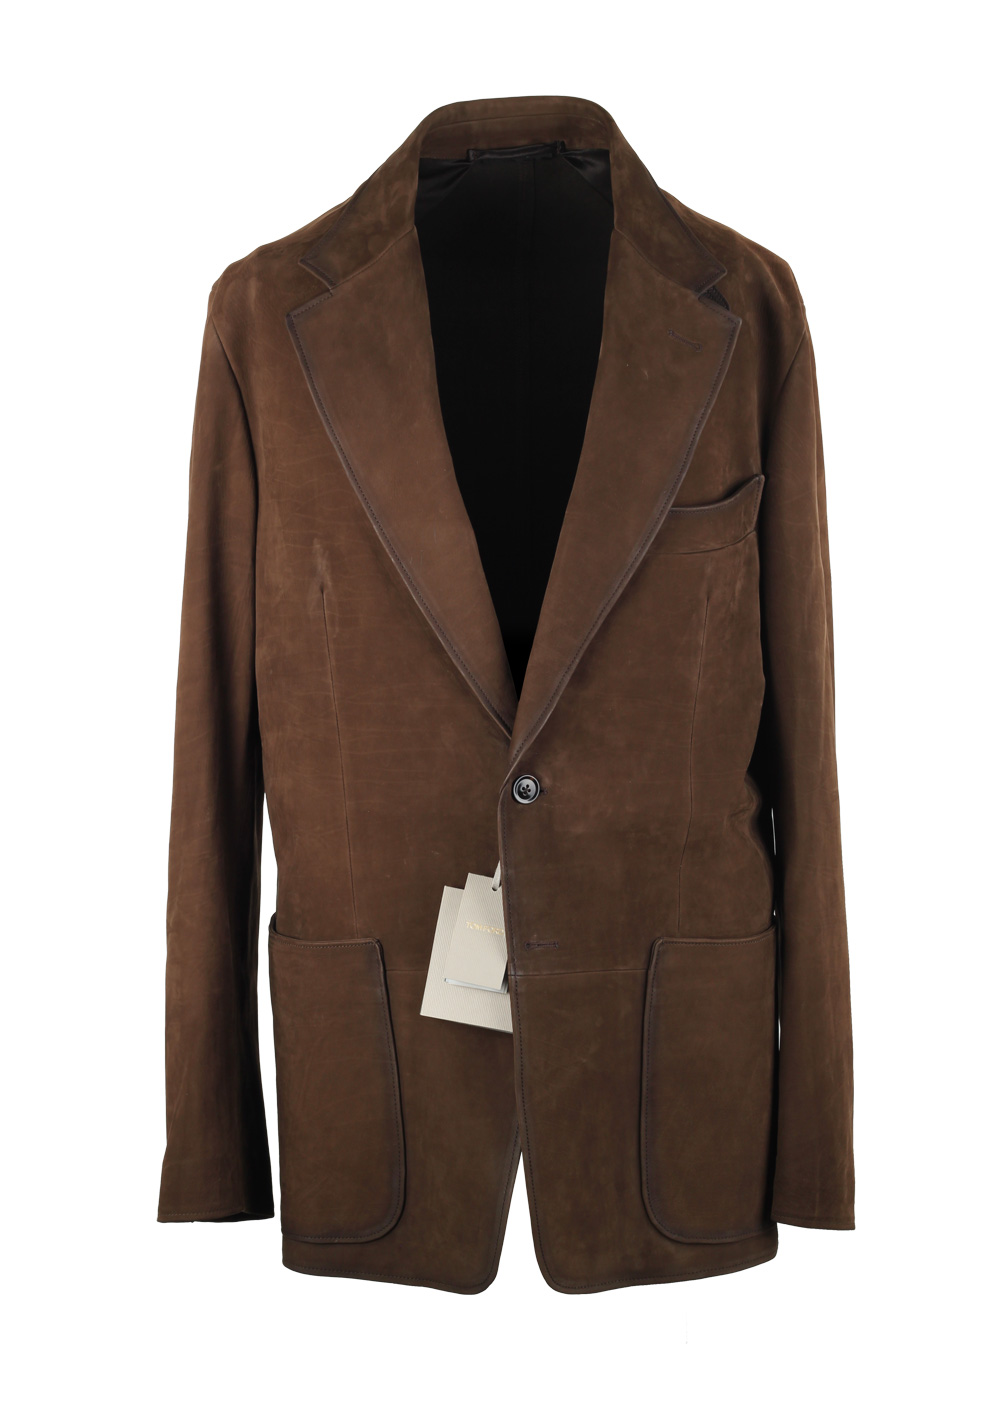 TOM FORD Brown Cashmere Sartorial Leather Suede Jacket Coat Size 48 / 38R U.S. | Costume Limité